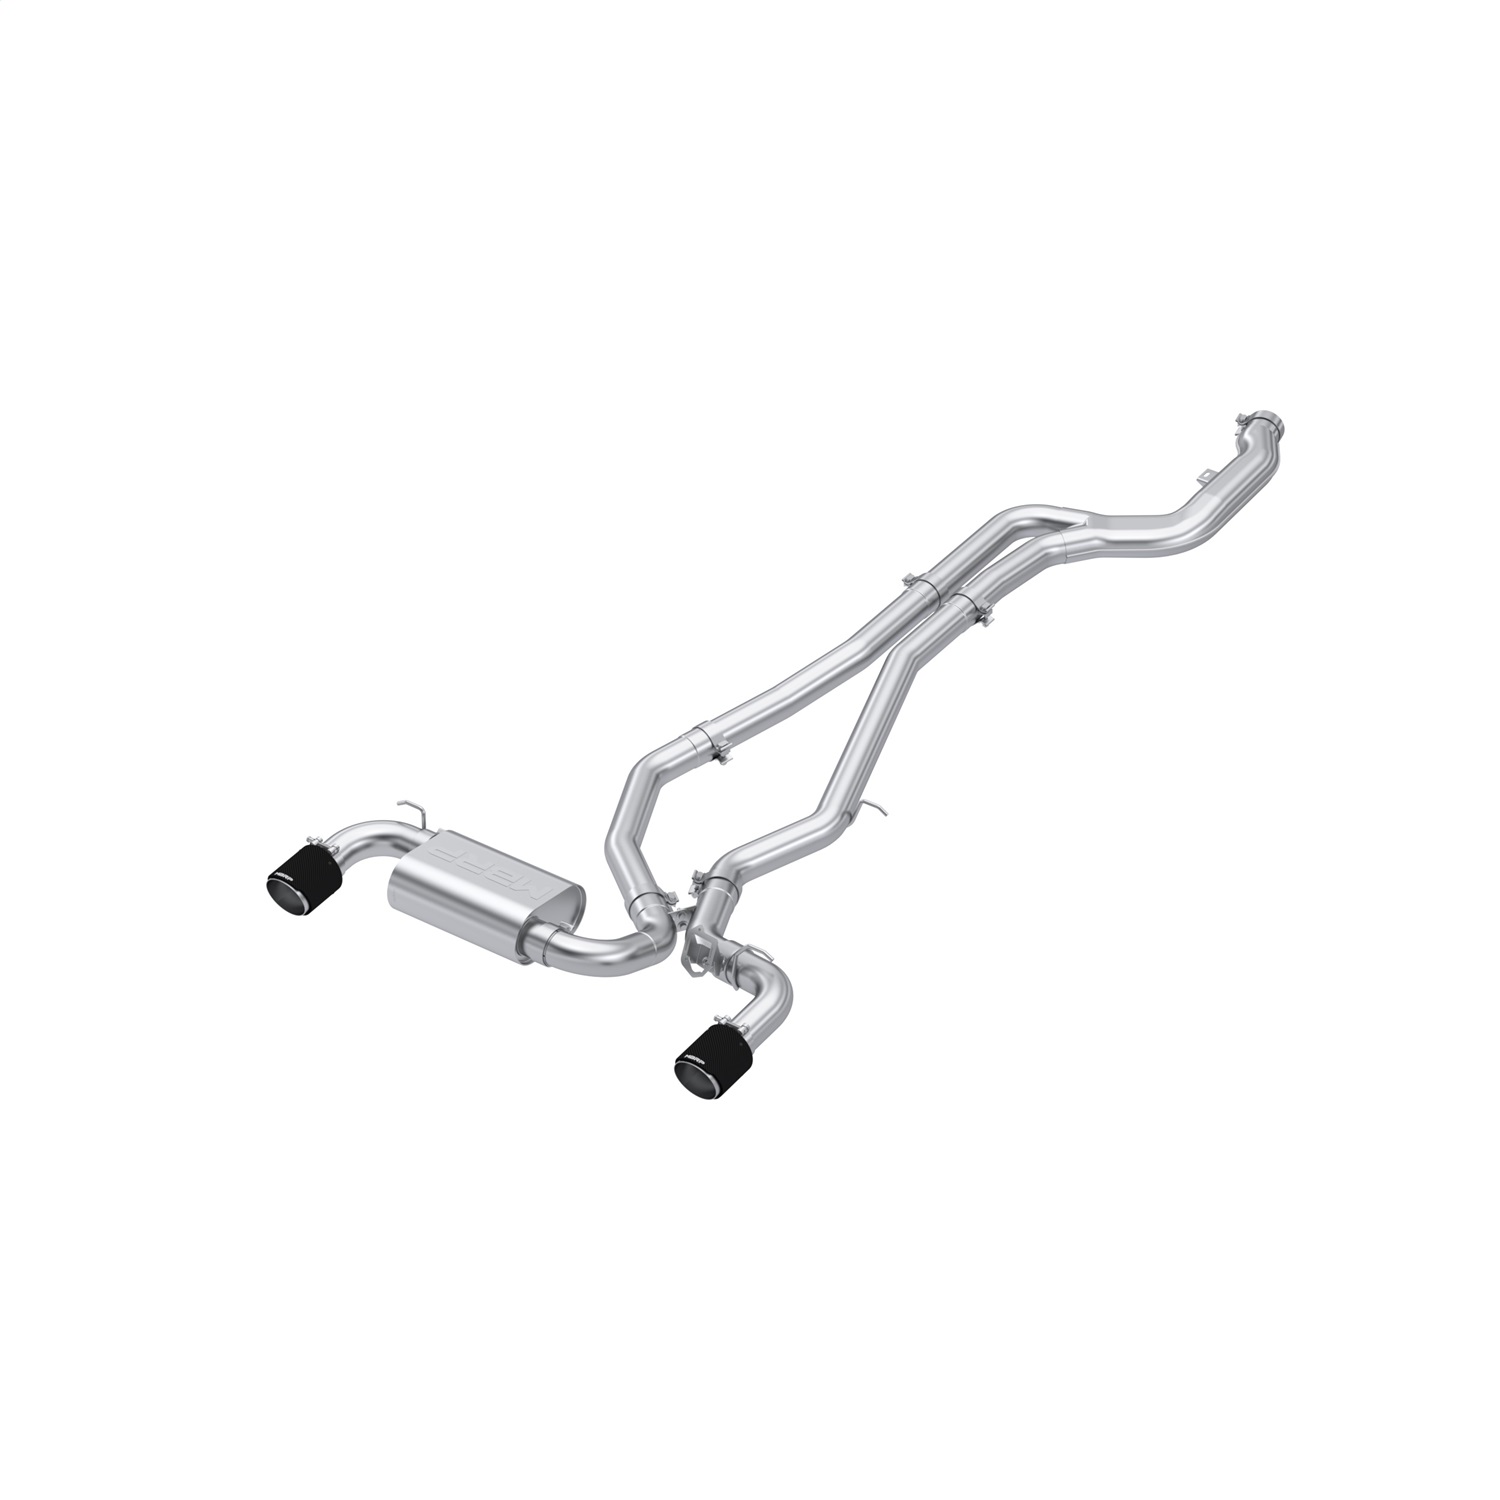 MBRP Exhaust S43003CF Armor Pro Cat Back Exhaust System Fits GR Supra Supra